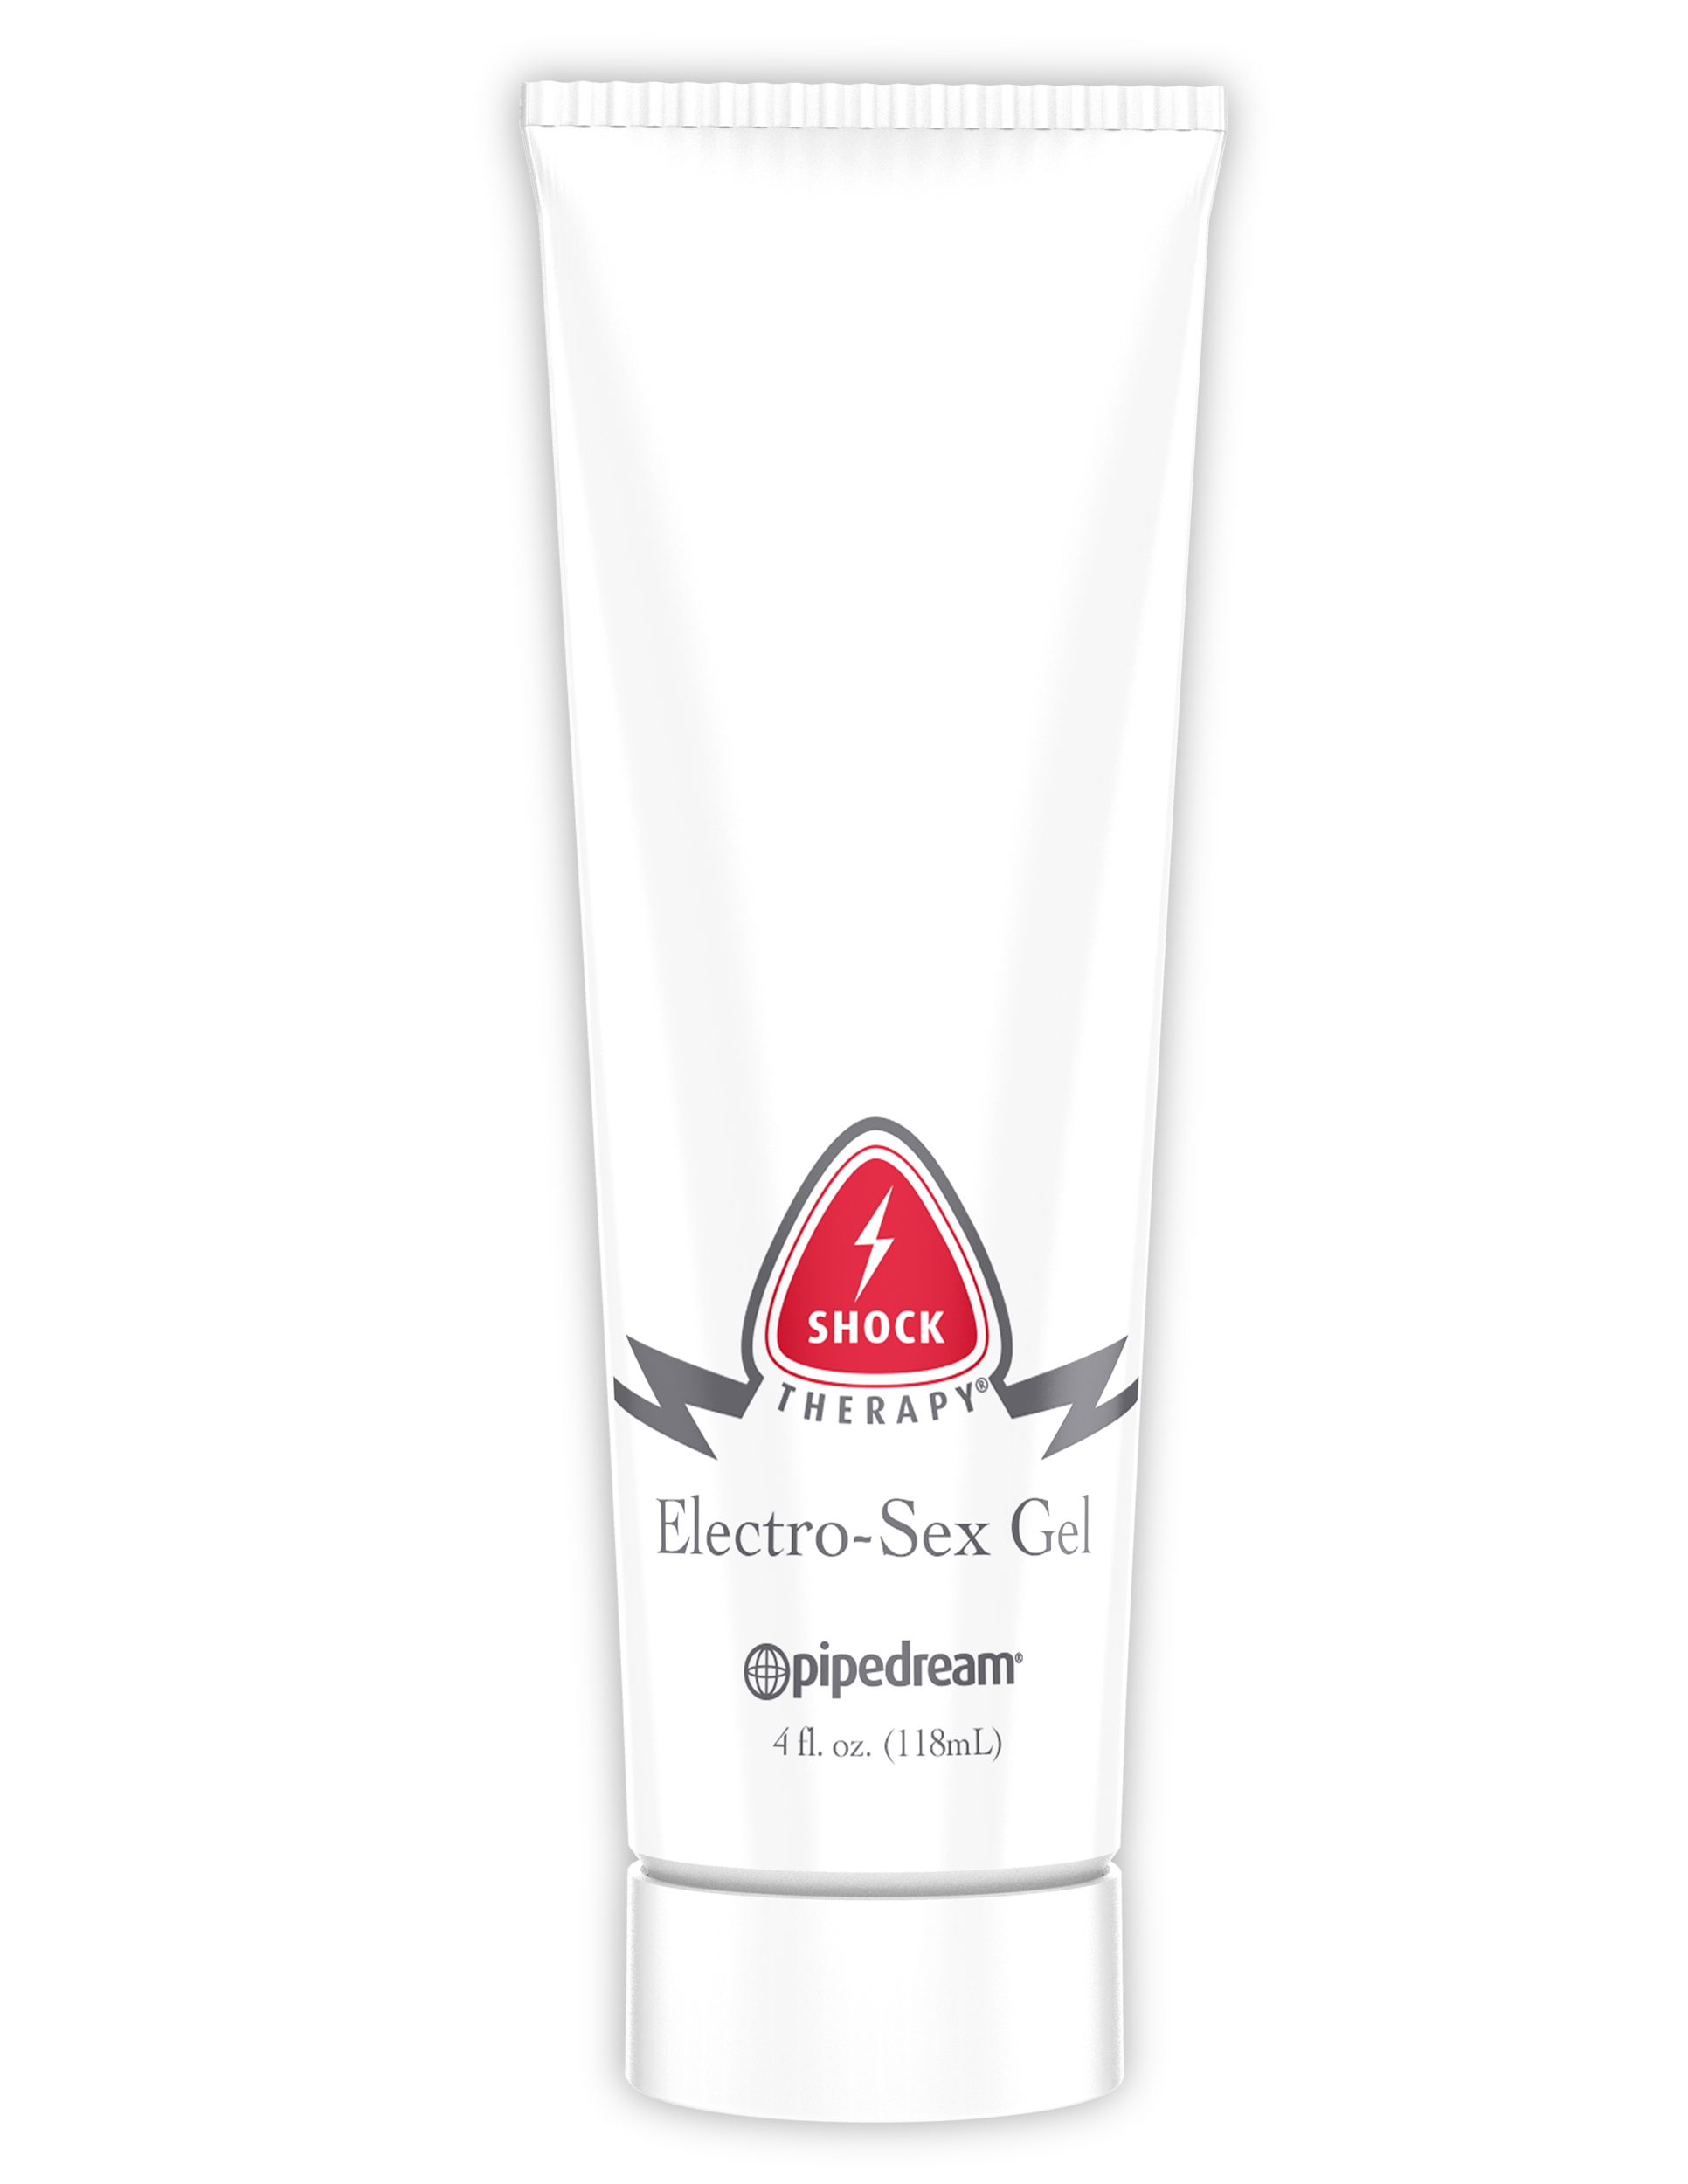 Shock Therapy Electro-Sex Gel